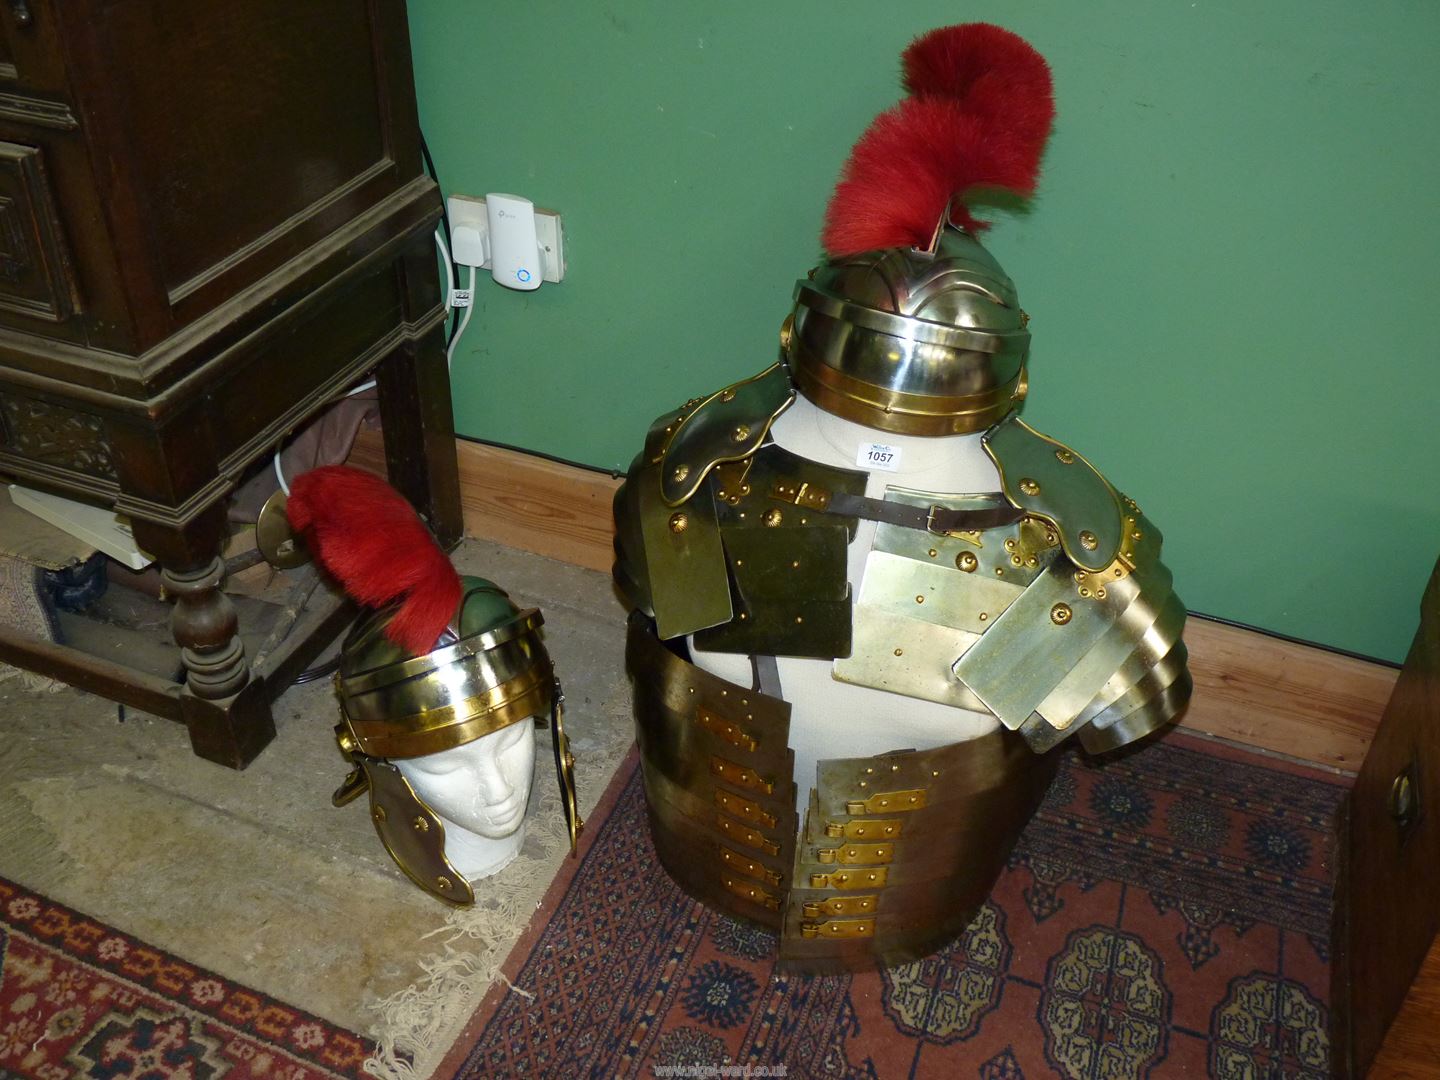 A re-enactment Roman Legionary part Suit of armour with extra helmet.